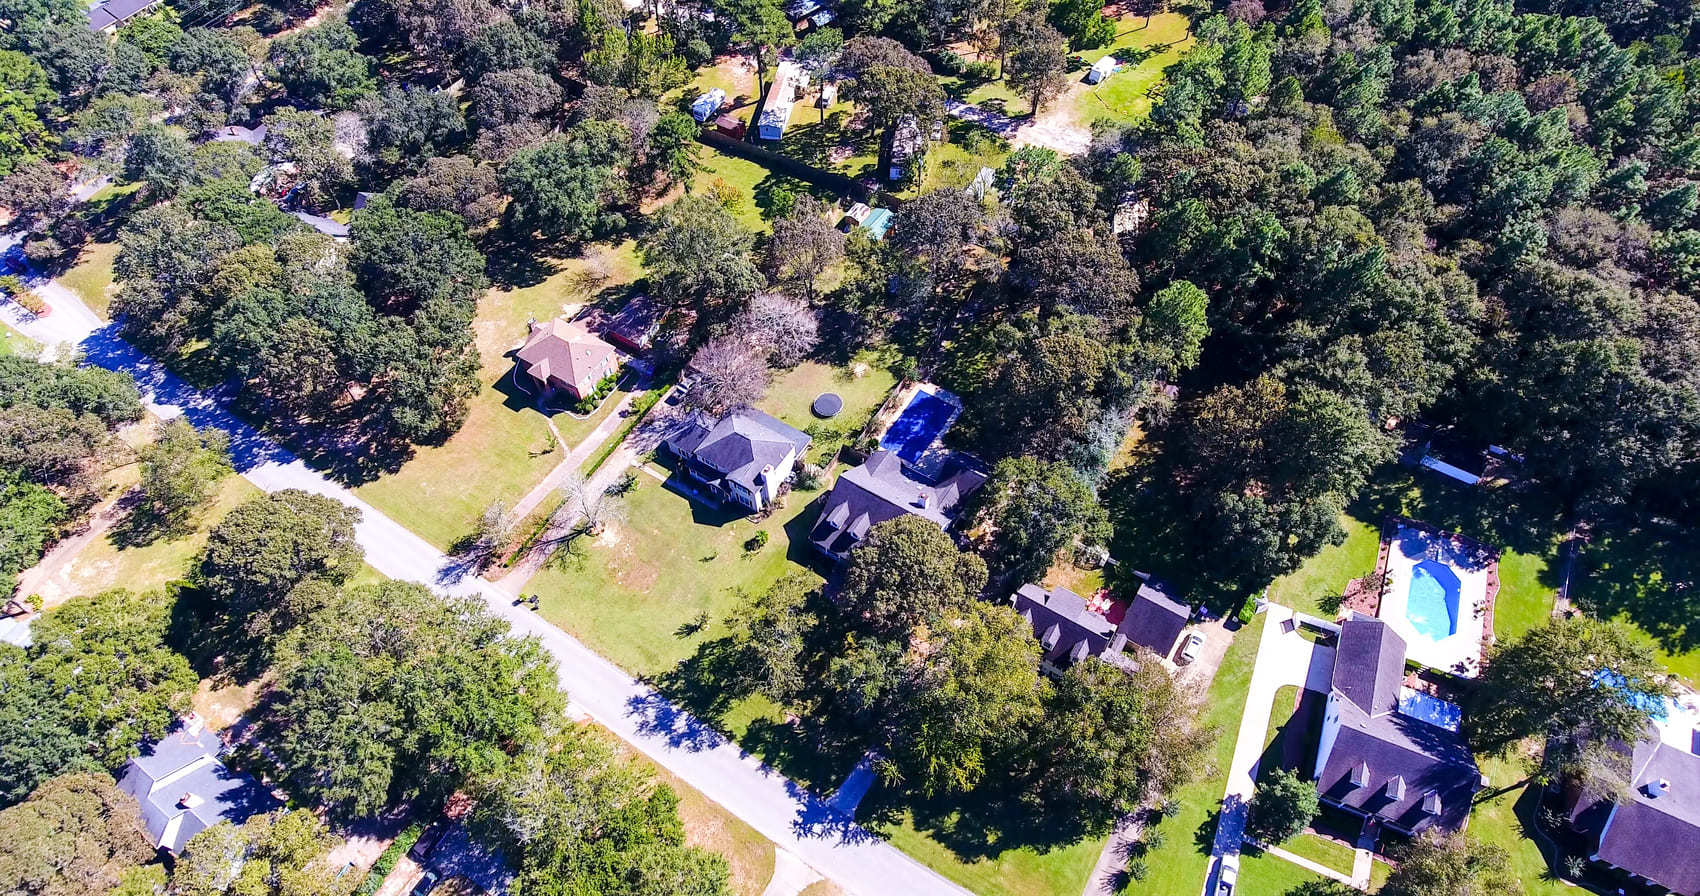 An overhead image of a residential neighborhood in Madison, AL